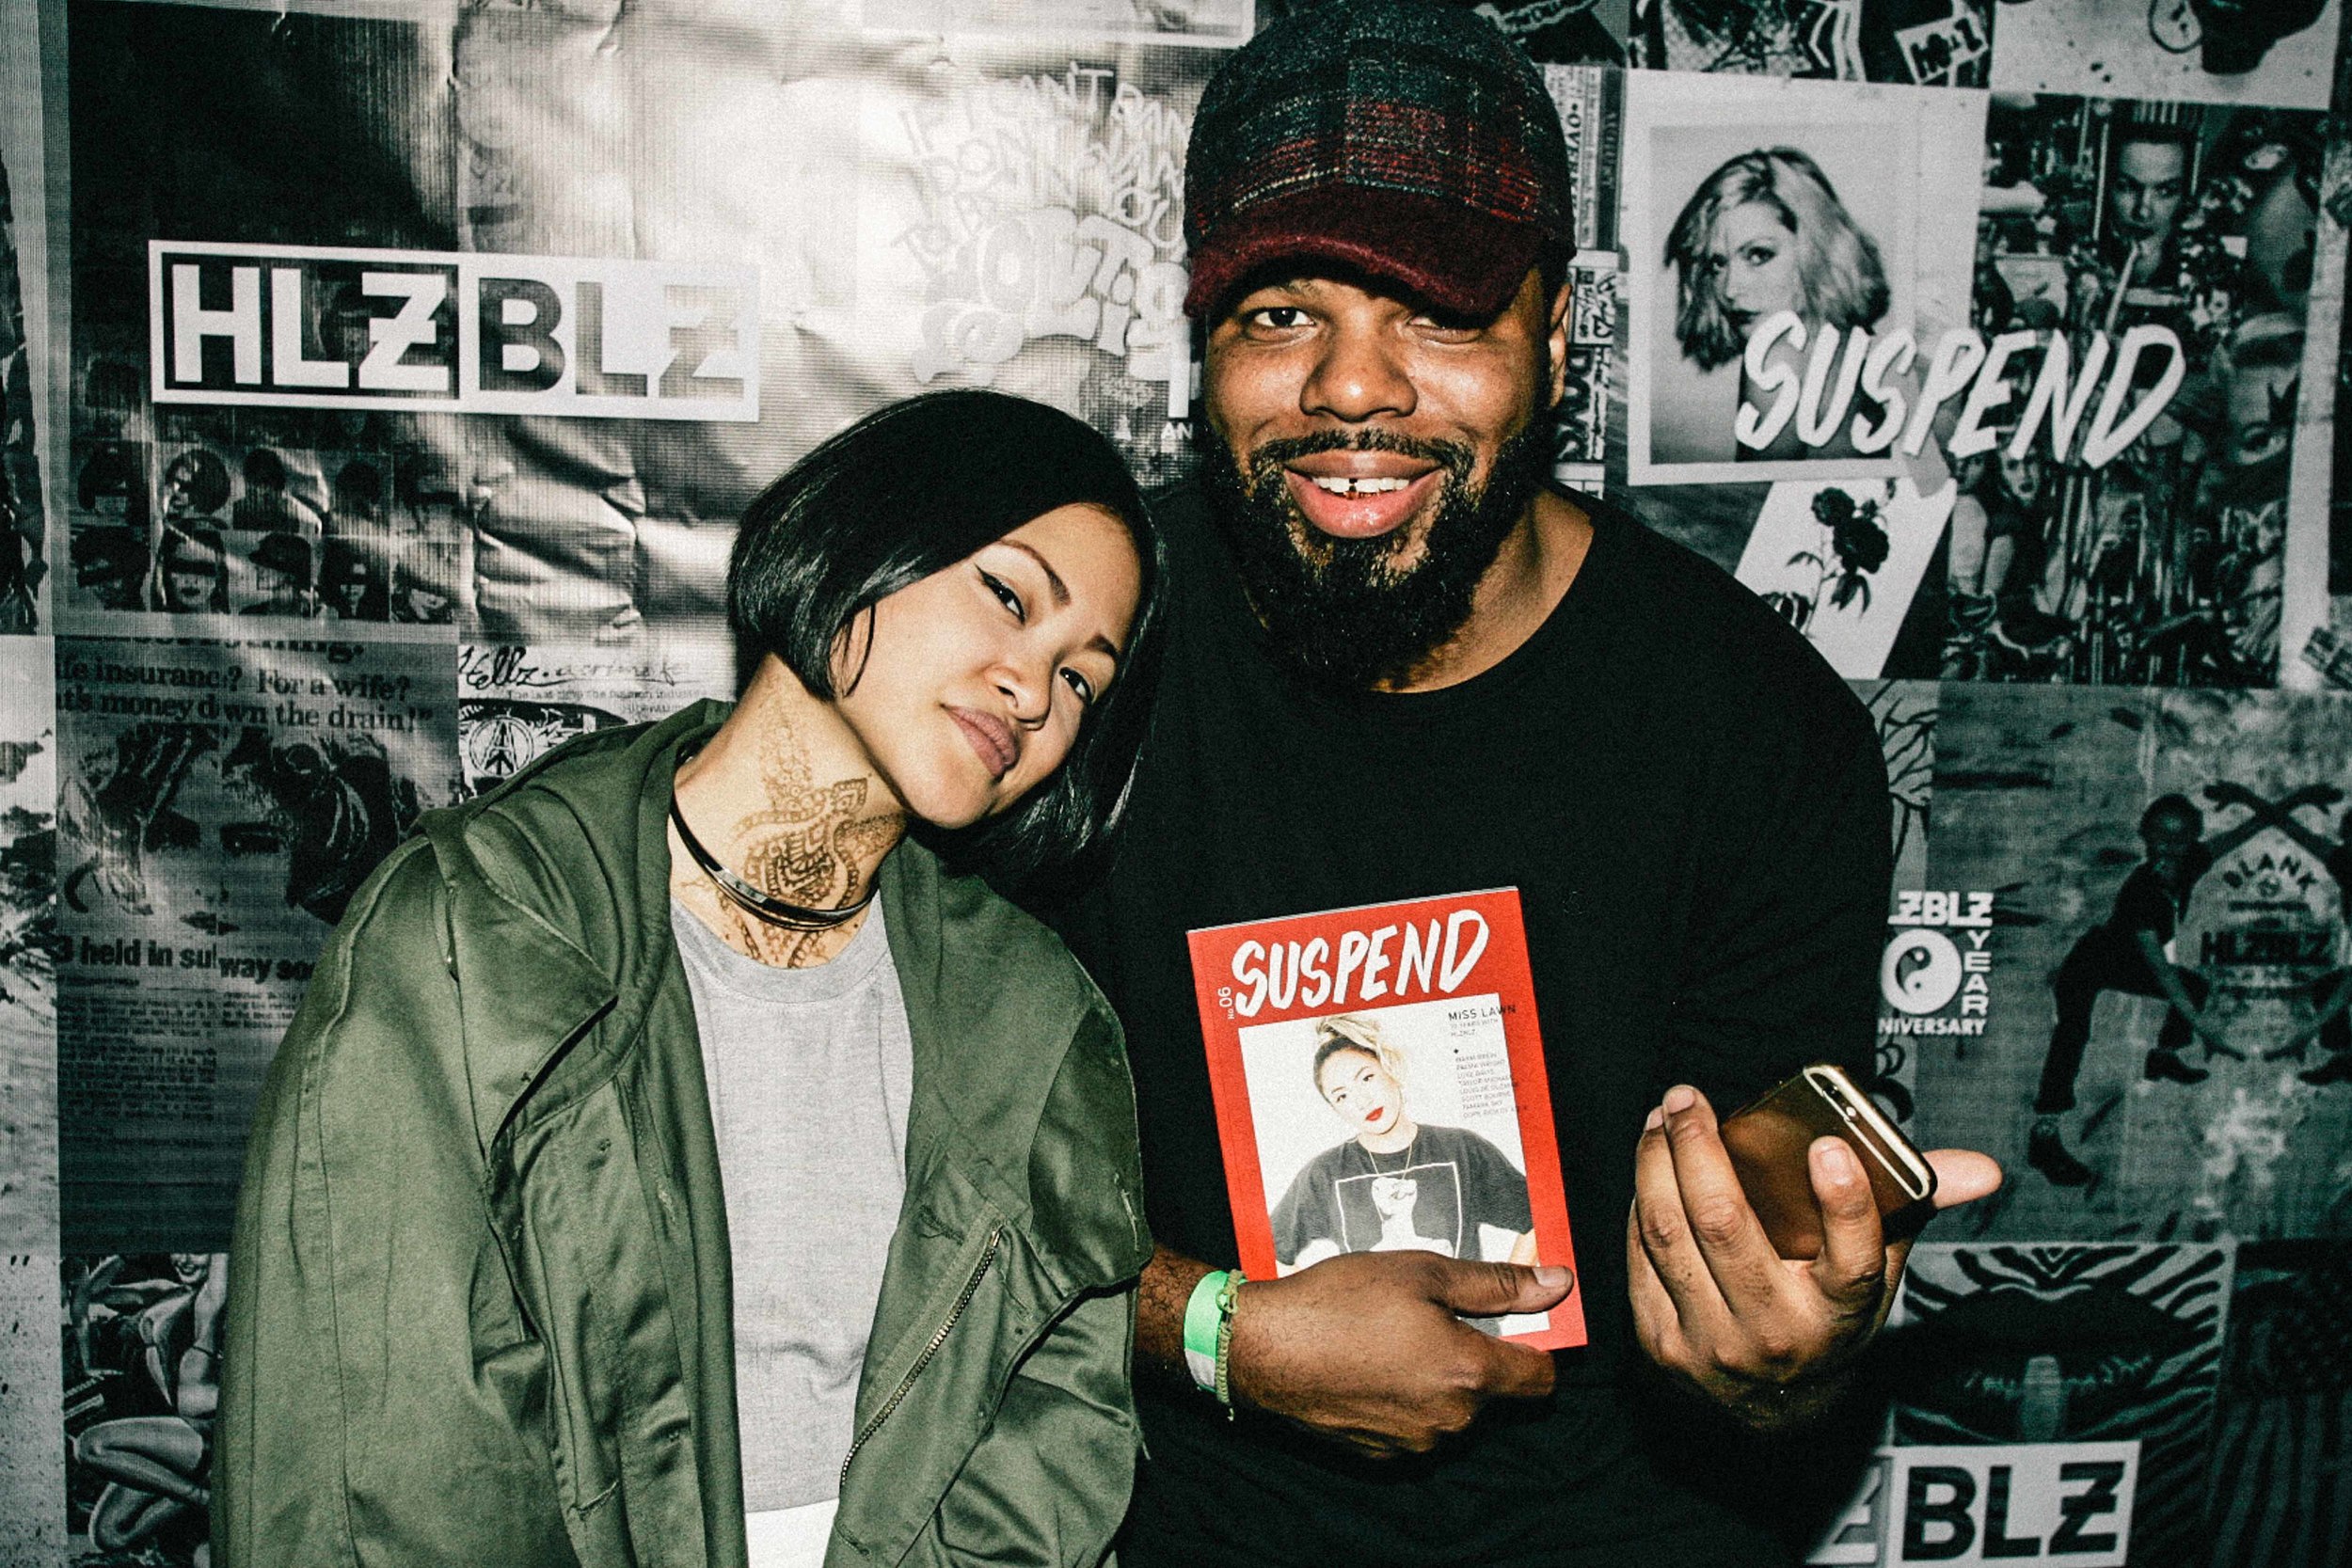  King Marie with Andre Power at the ISSUE 06 Release Party x 10YR HLZBLZ Anniversary (Feb 11) at Globe Theater. / Photo: © Jonathan Tate for SUSPEND Magazine. 